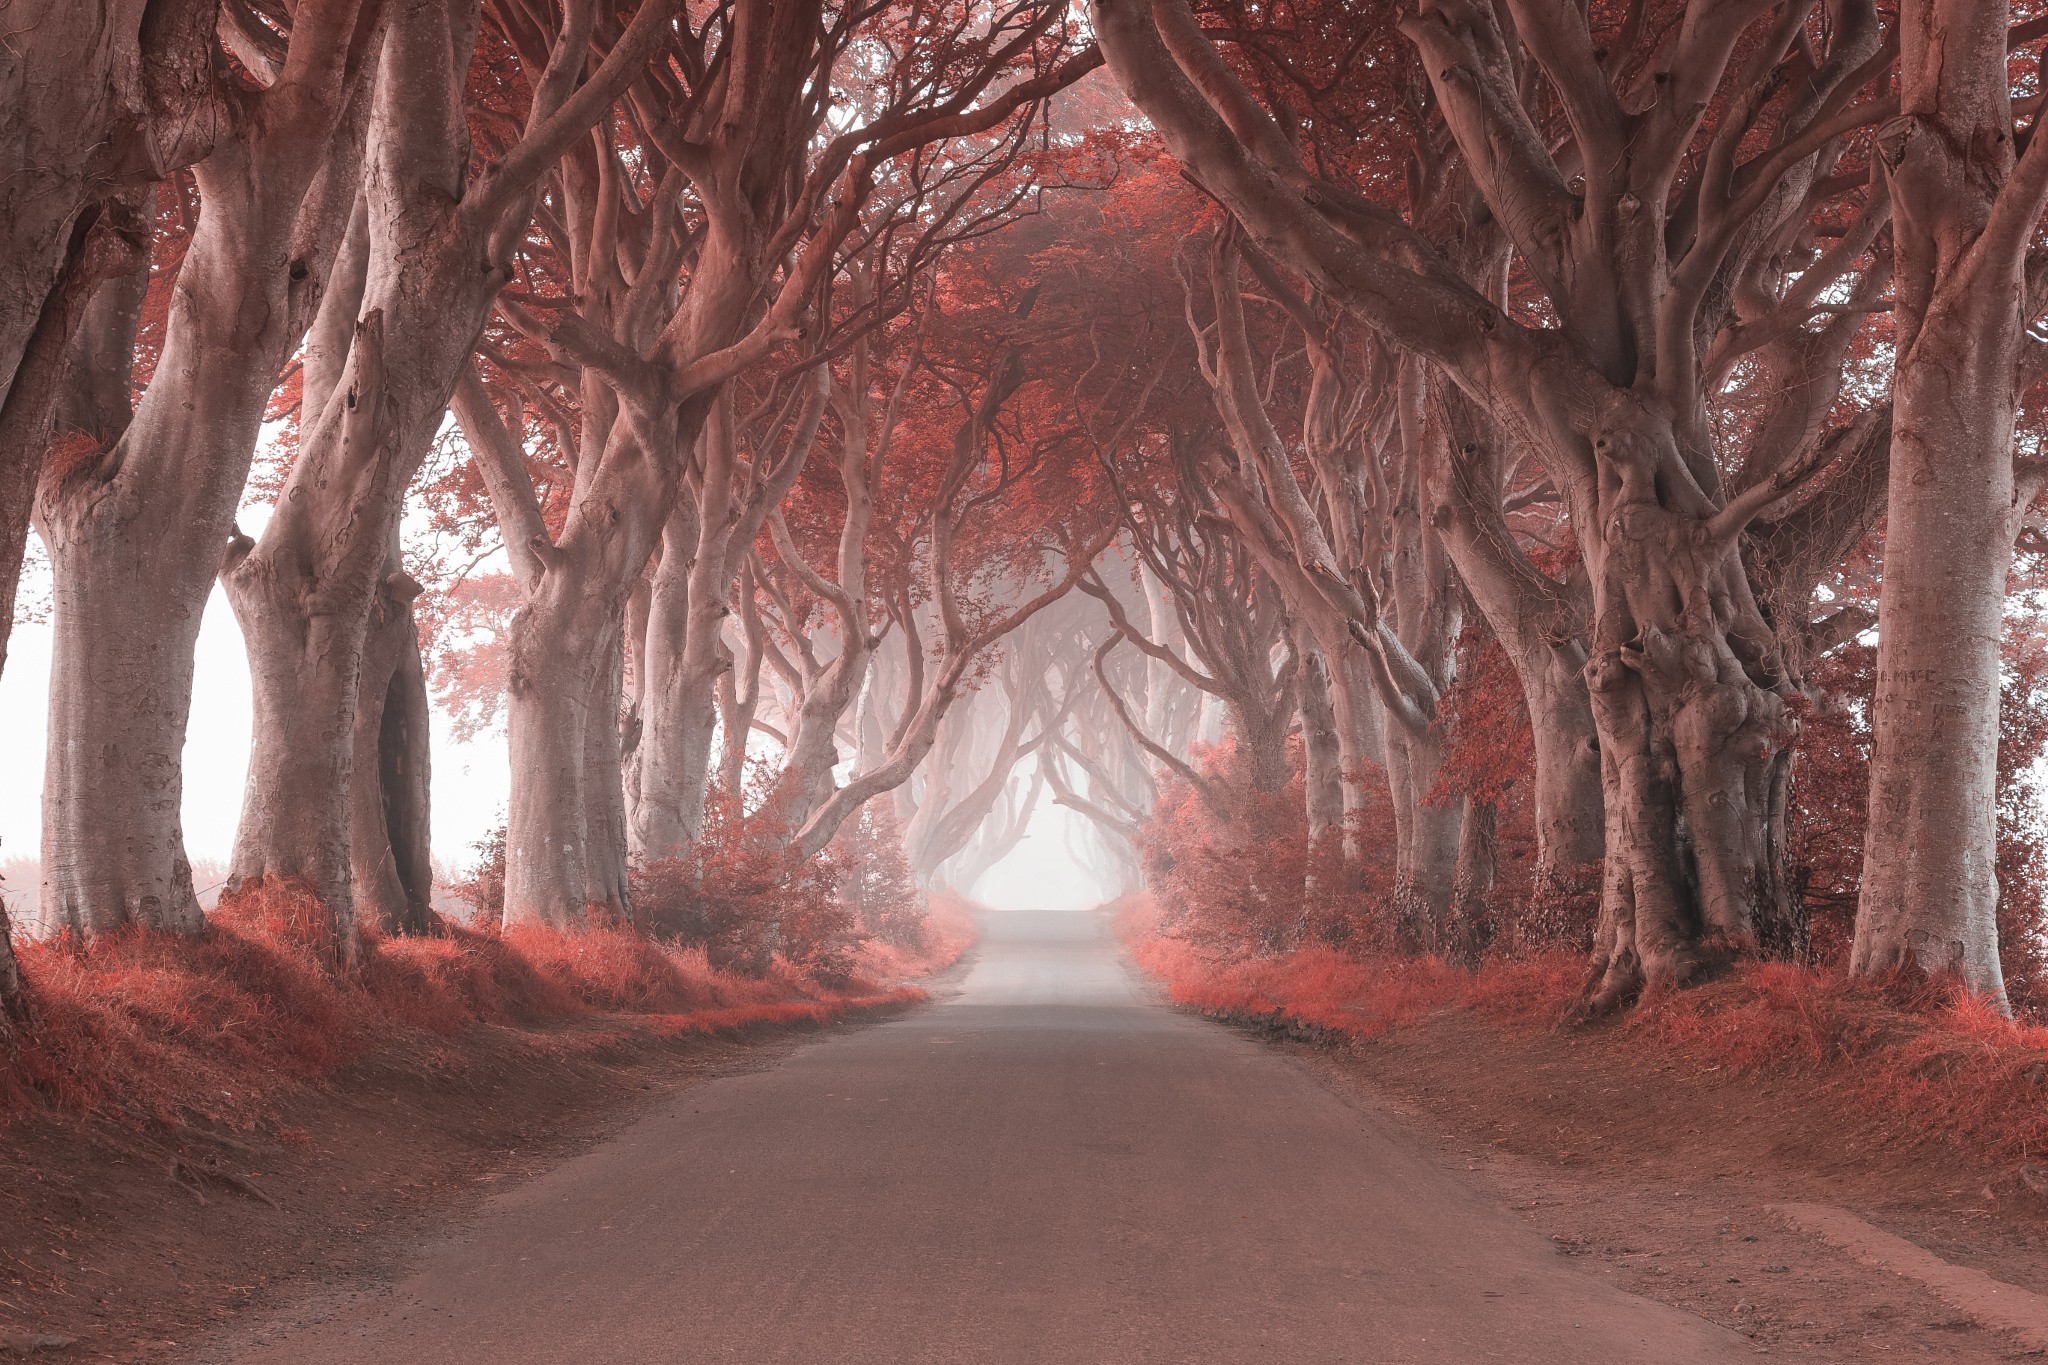 photography, Nature, Landscape, Trees, Leaves, Road, Mist, Grass, Ireland Wallpaper